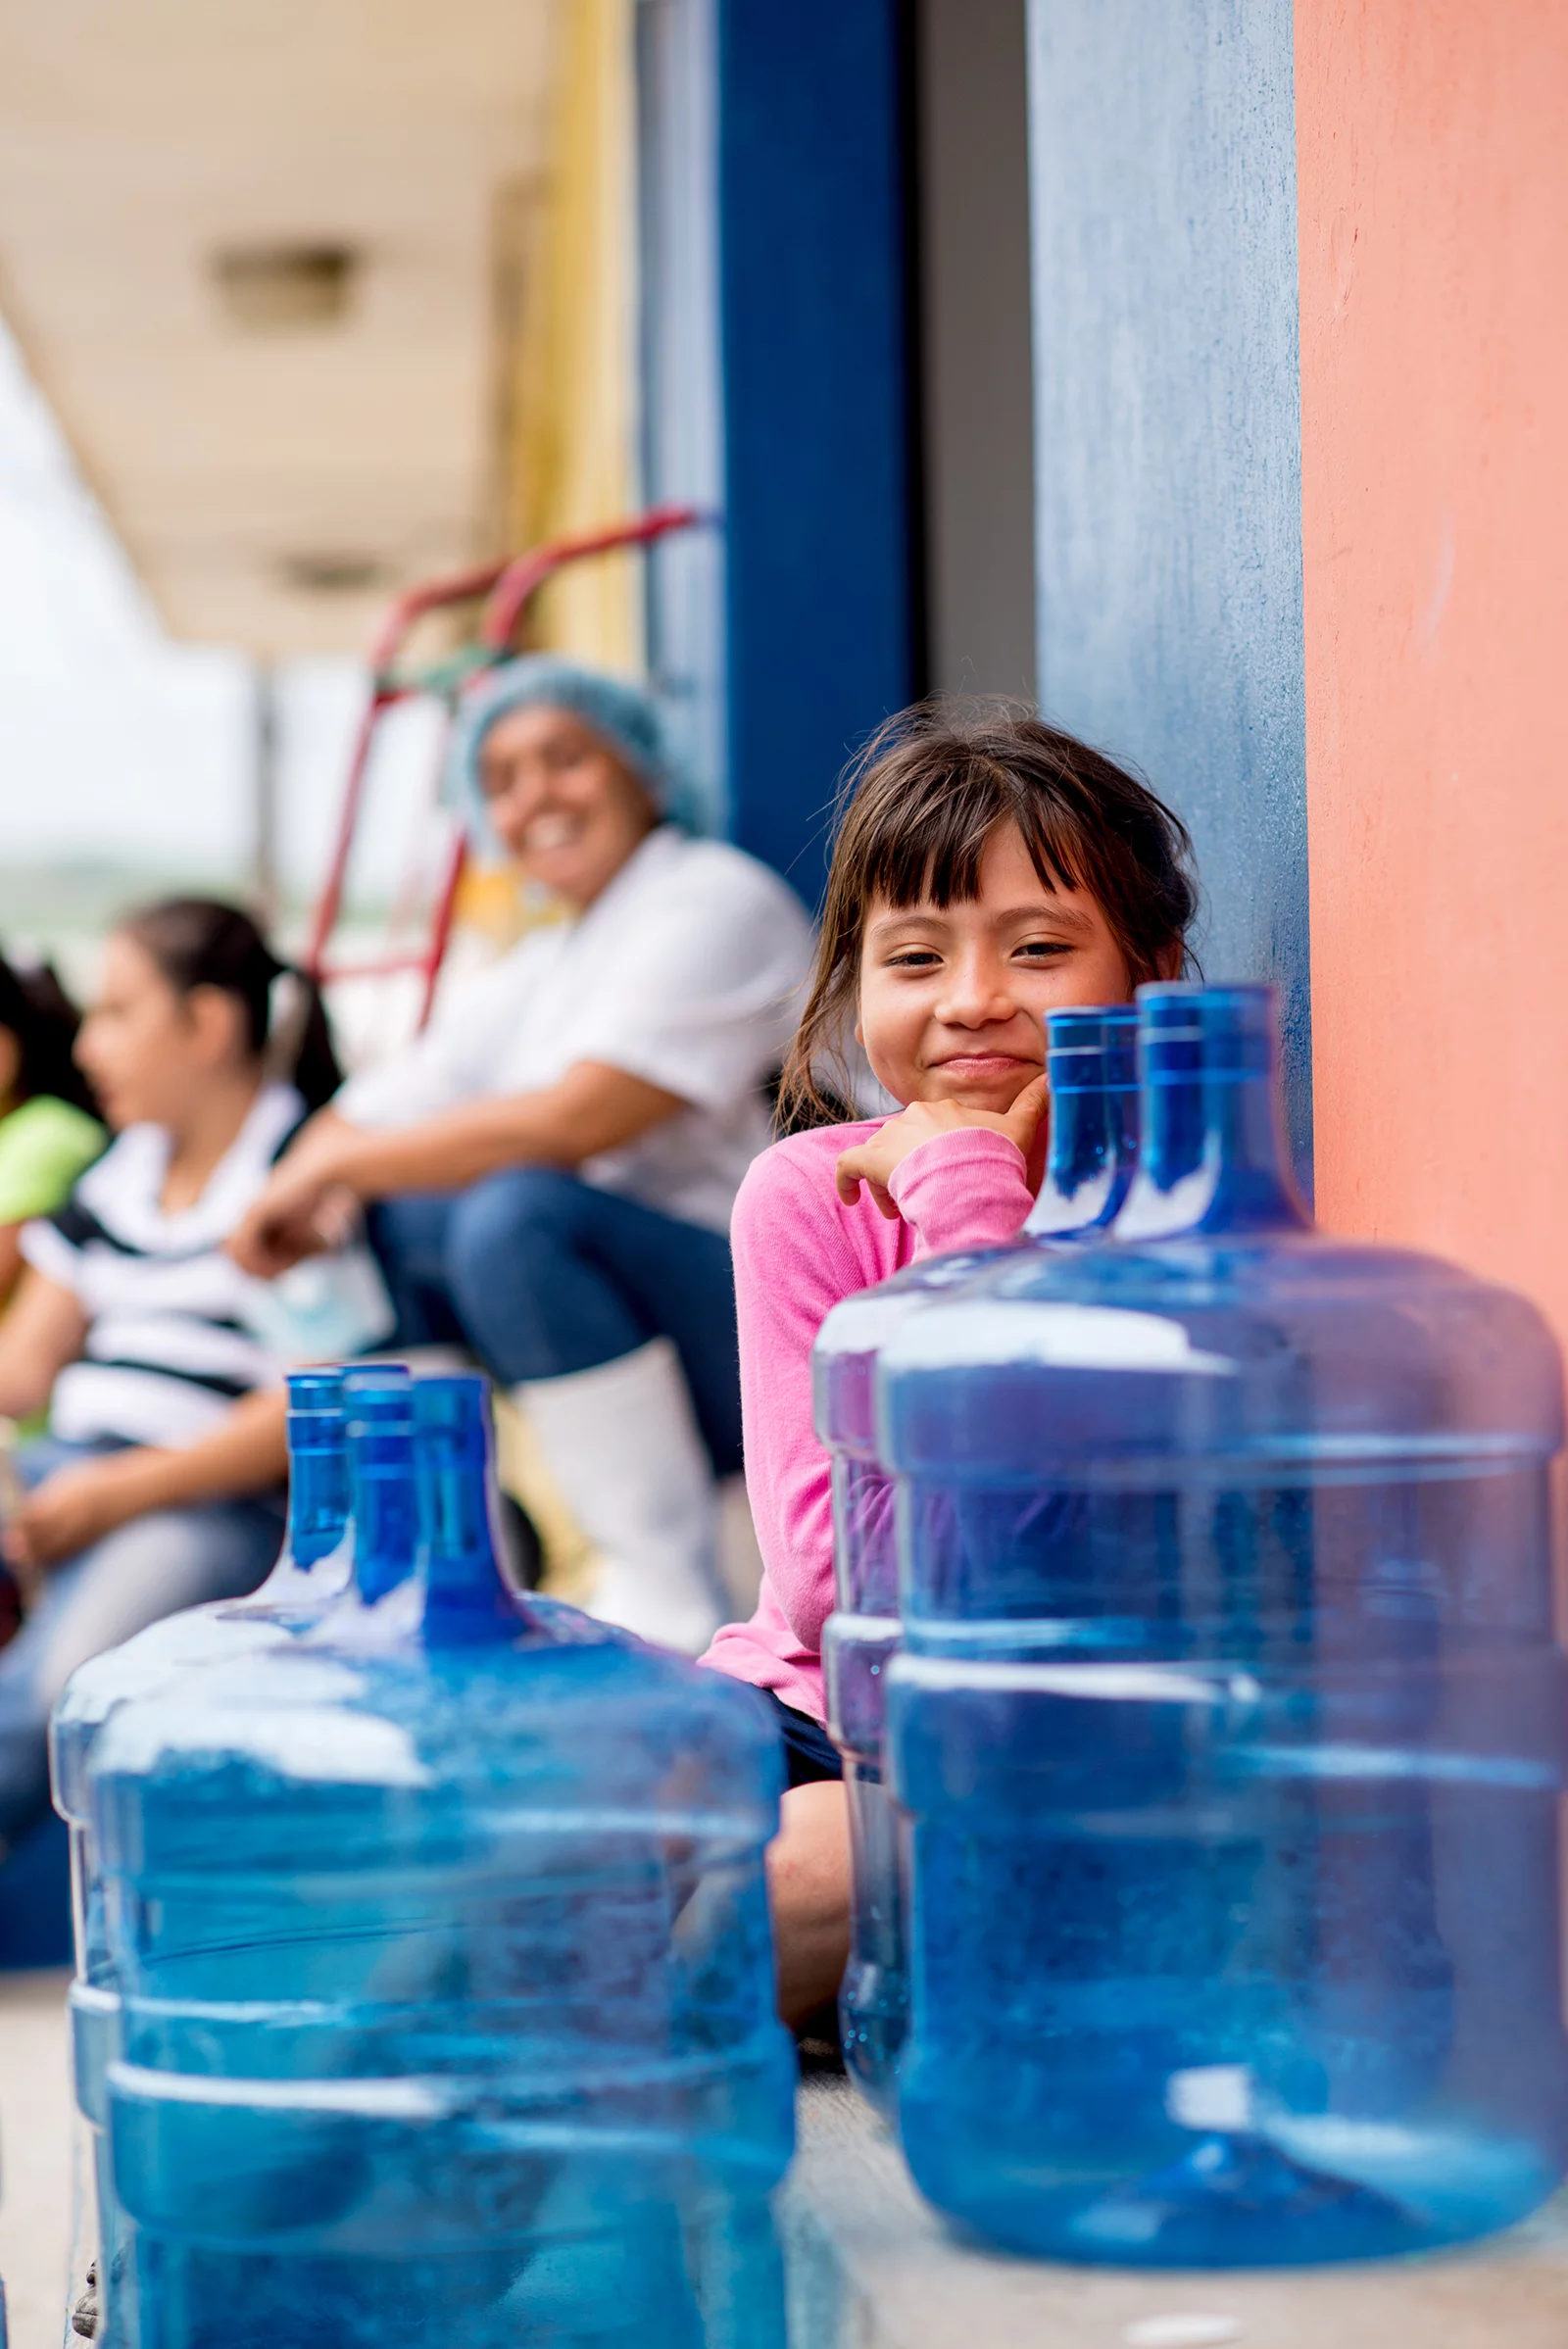 Little girl smiling with water jugs